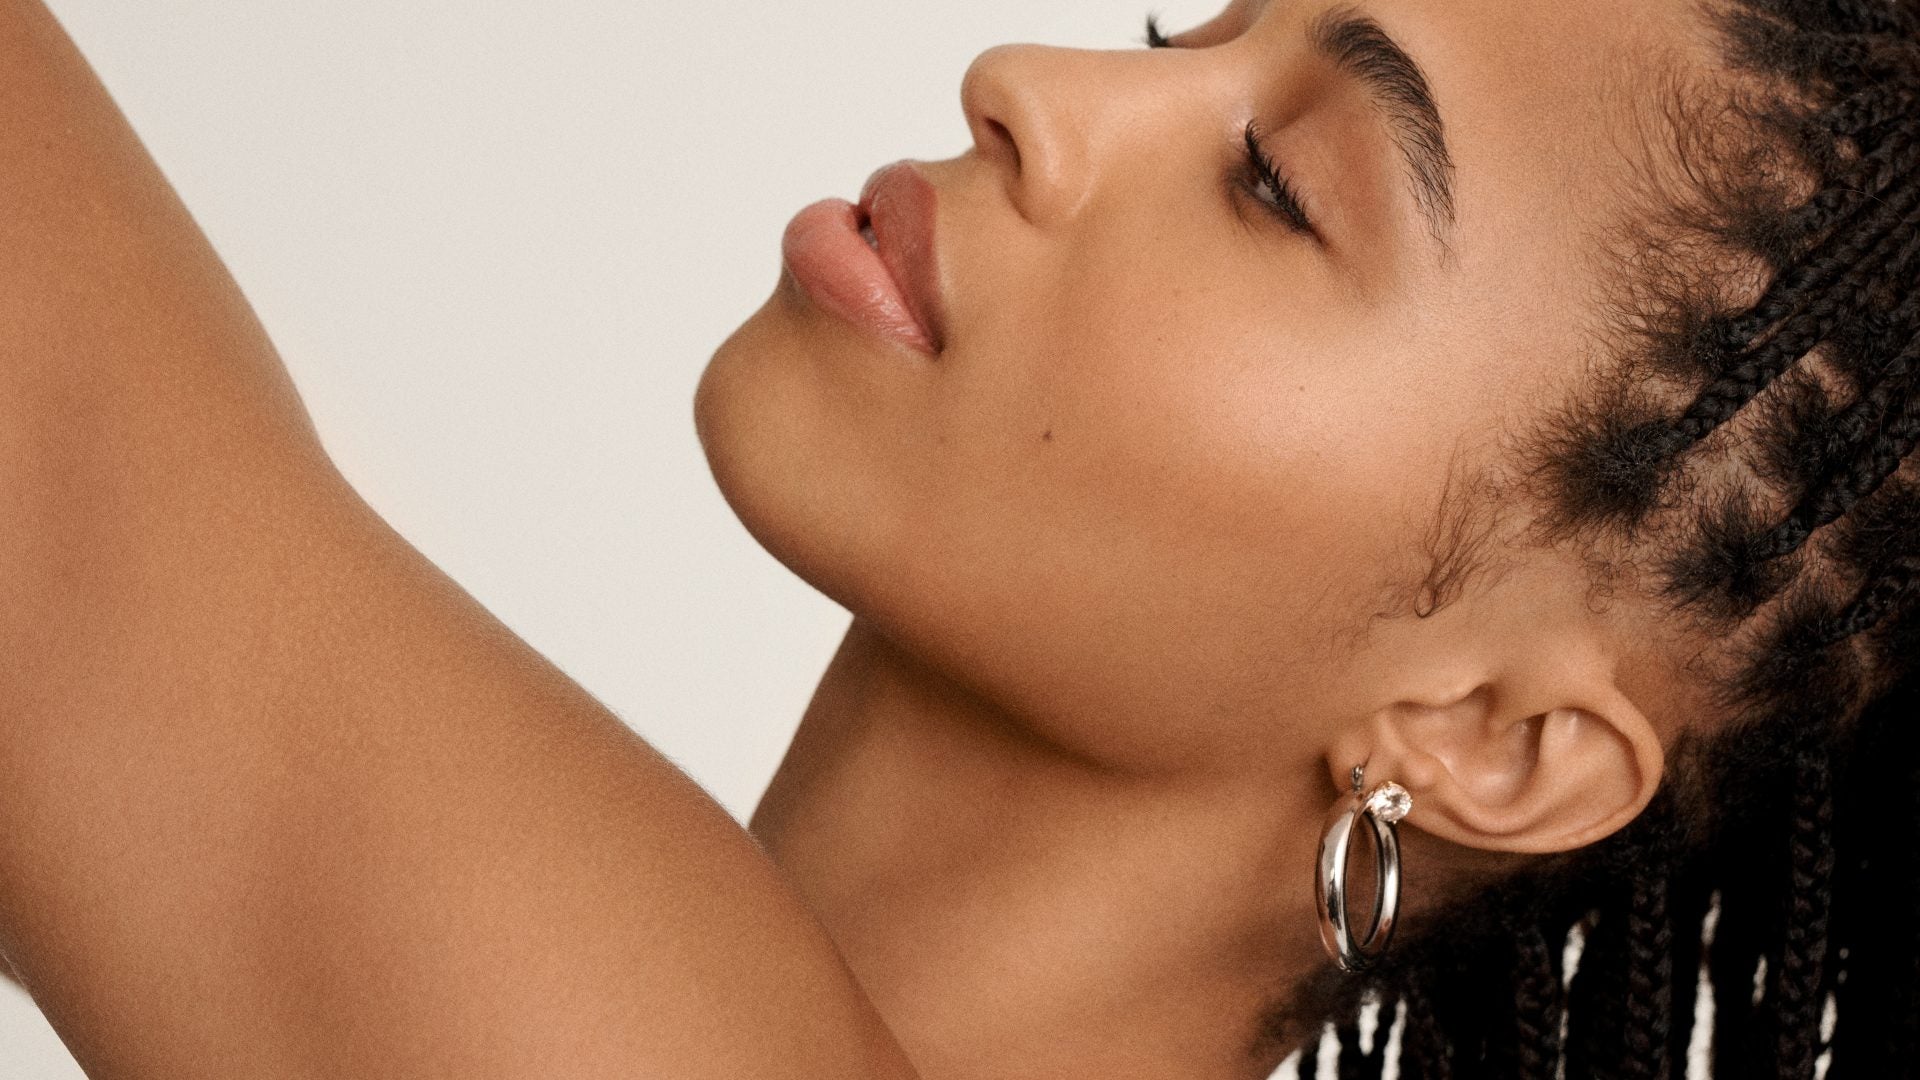 Exclusive: Glossier Leading In Inclusive Beauty With WNBA Partnership